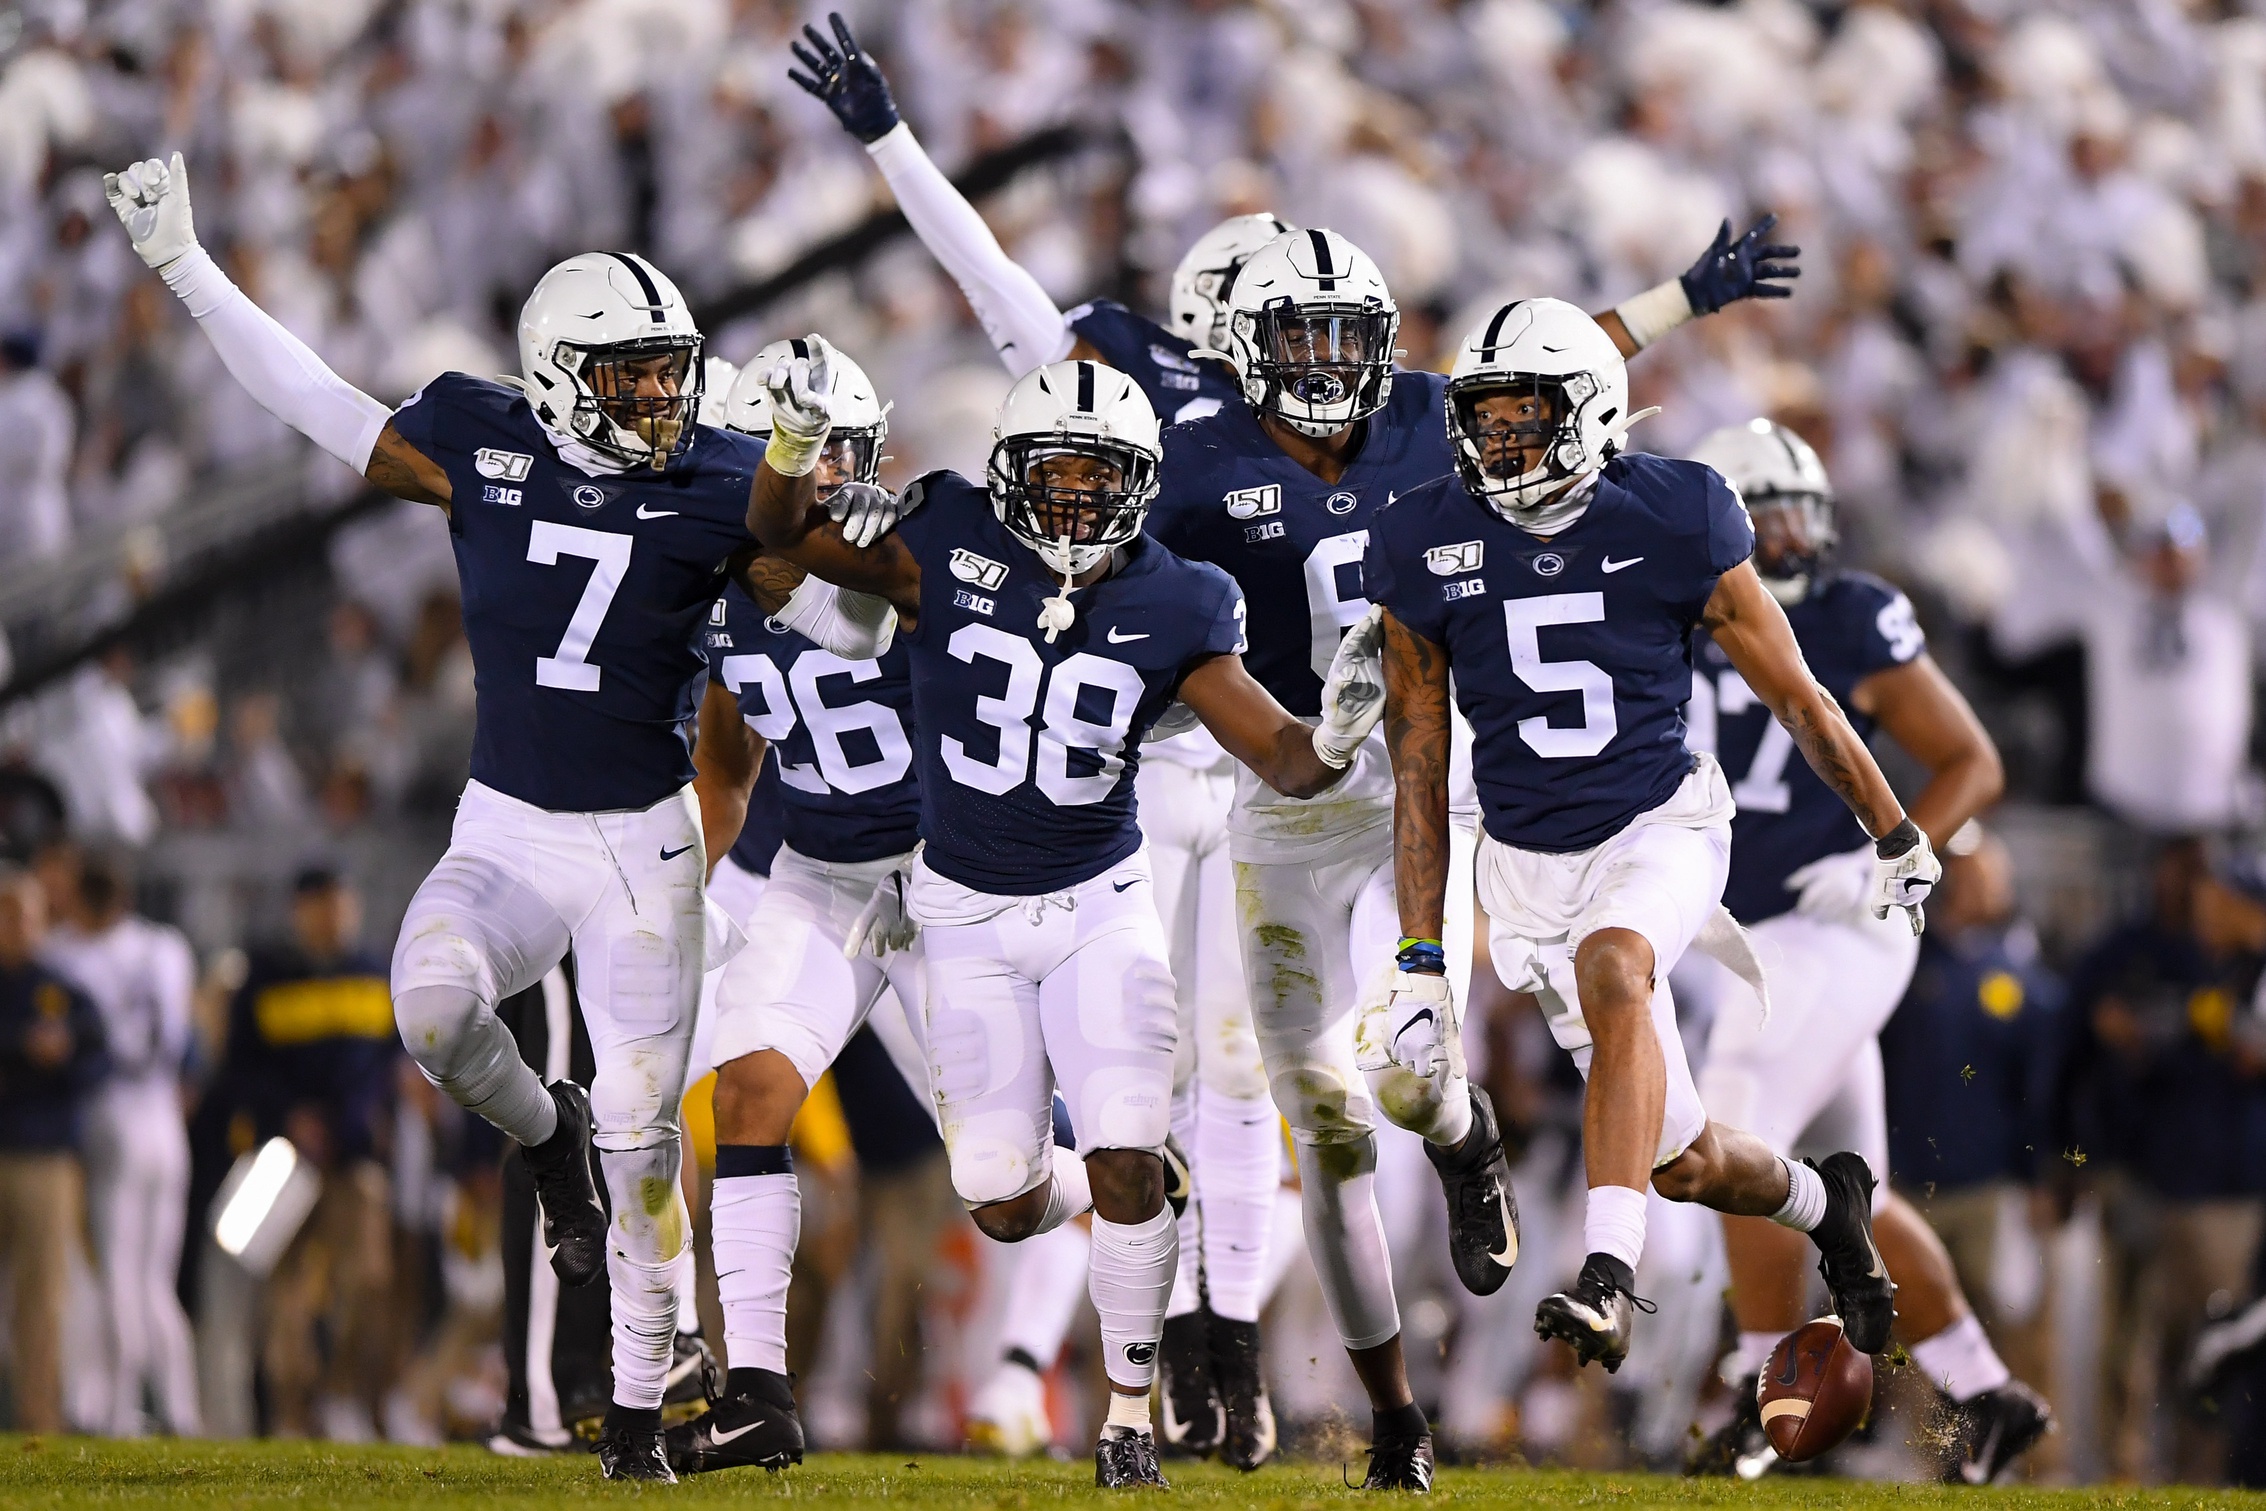 Podcast: Penn State is No. 4 in College Football Playoff rankings, reactions and more